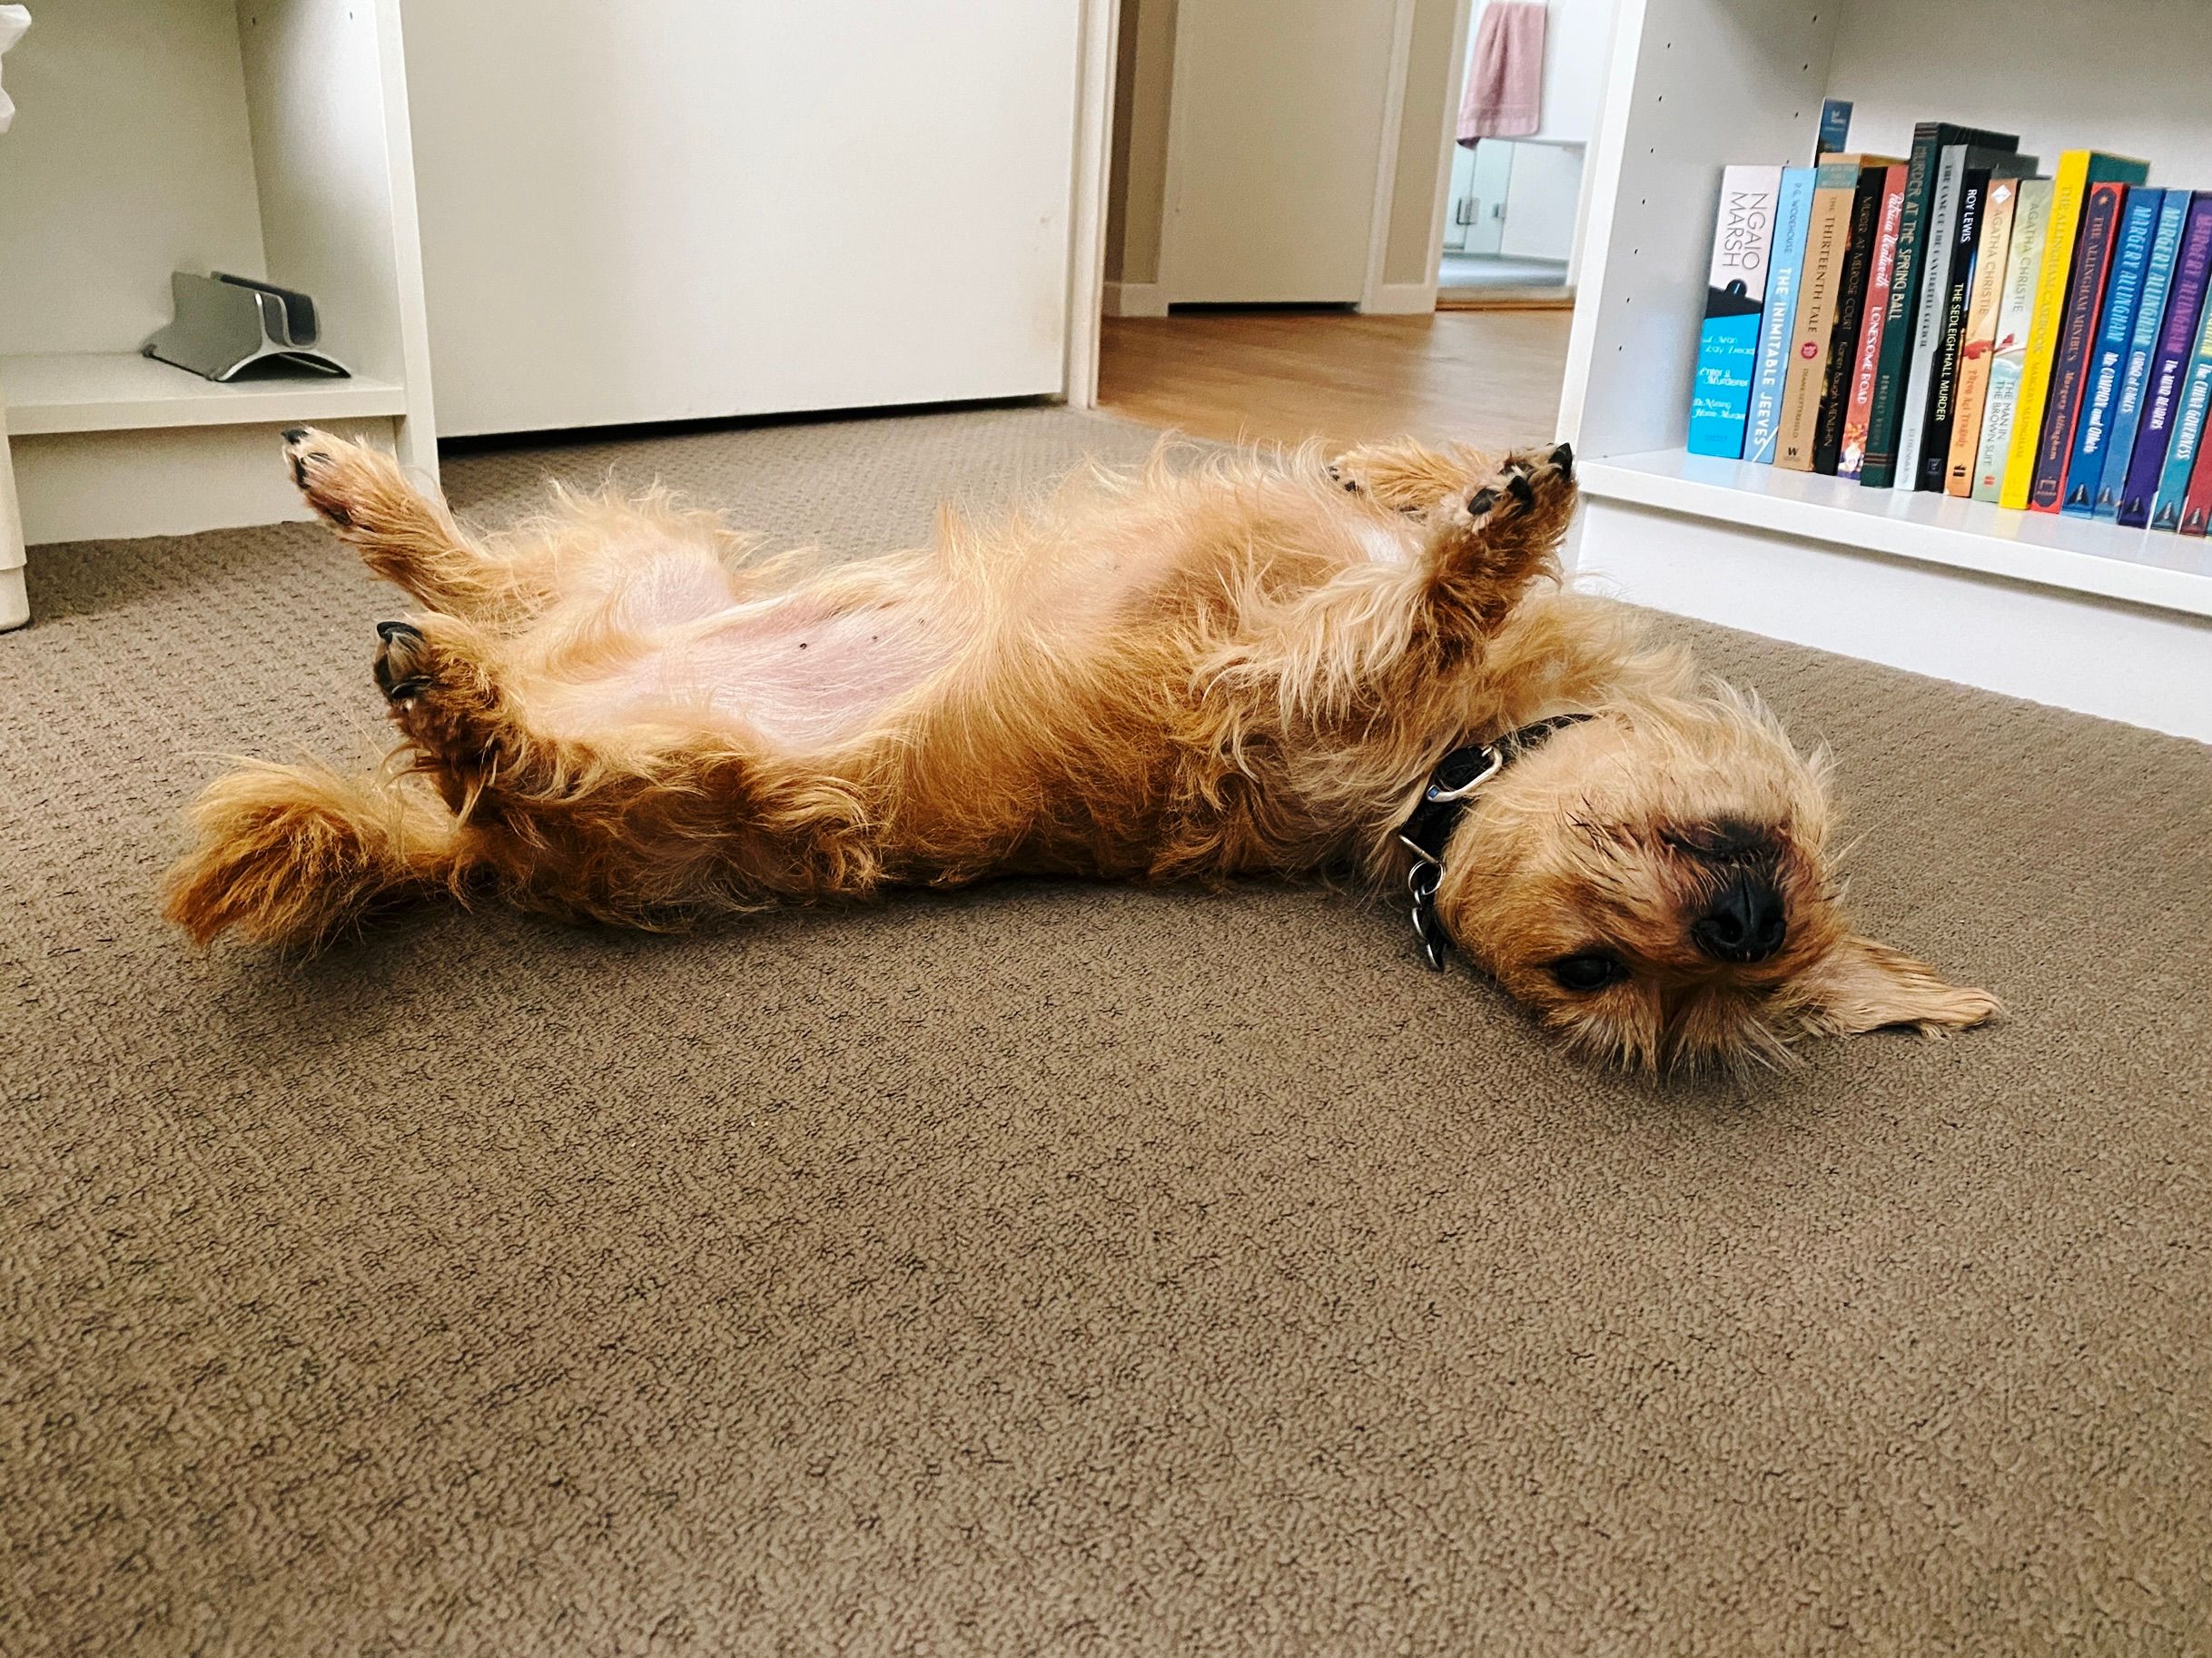 A photo taken from almost ground level of a small scruffy blonde dog who's lying upside down on the floor looking sleepily towards the camera. Both his back legs are in the air, as is one of his front legs.